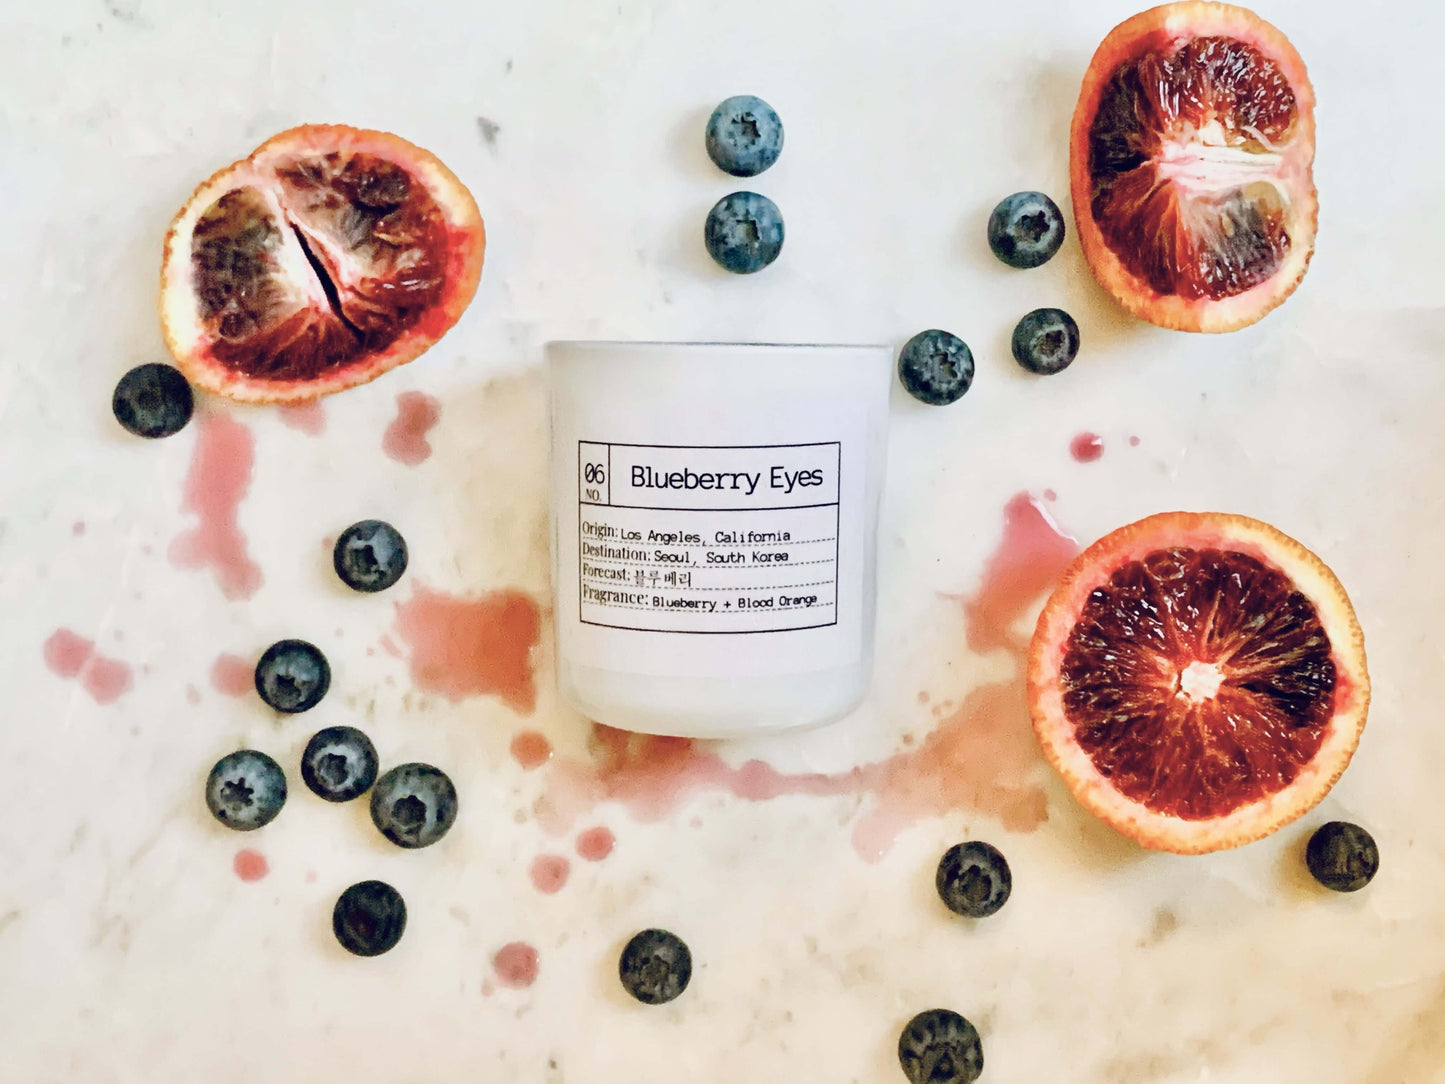 FLORES LANE x MAX: Blueberry Eyes Soy Candle, Slow Burn Candle – Flores Lane